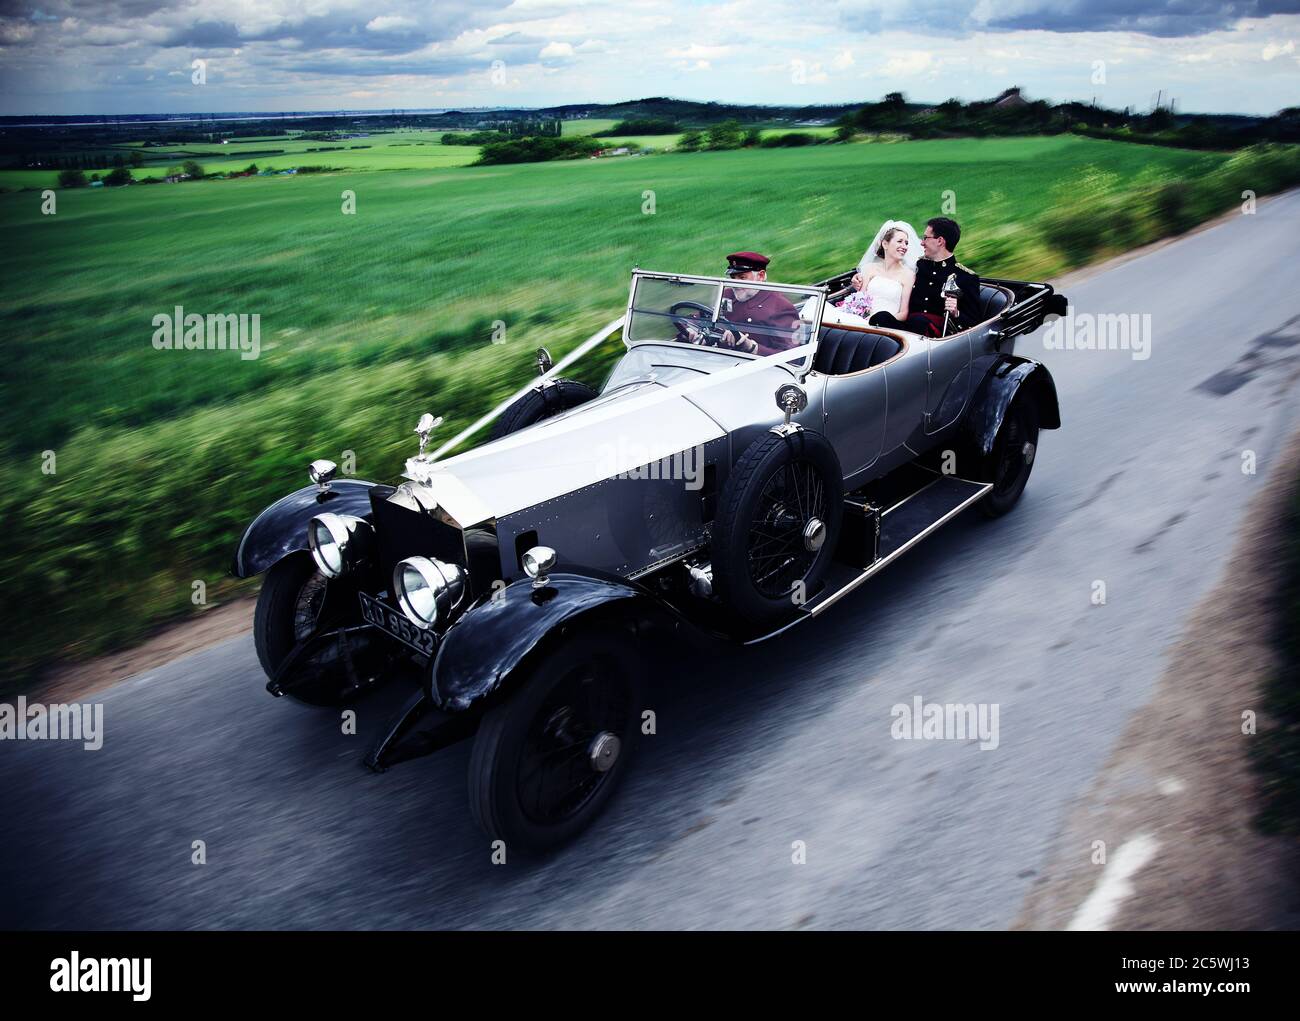 Rare 1920s classic vintage Rolls Royce Silver Ghost wedding car vehicle in motion. Bride and groom driven by chauffeur on their wedding day. Stock Photo